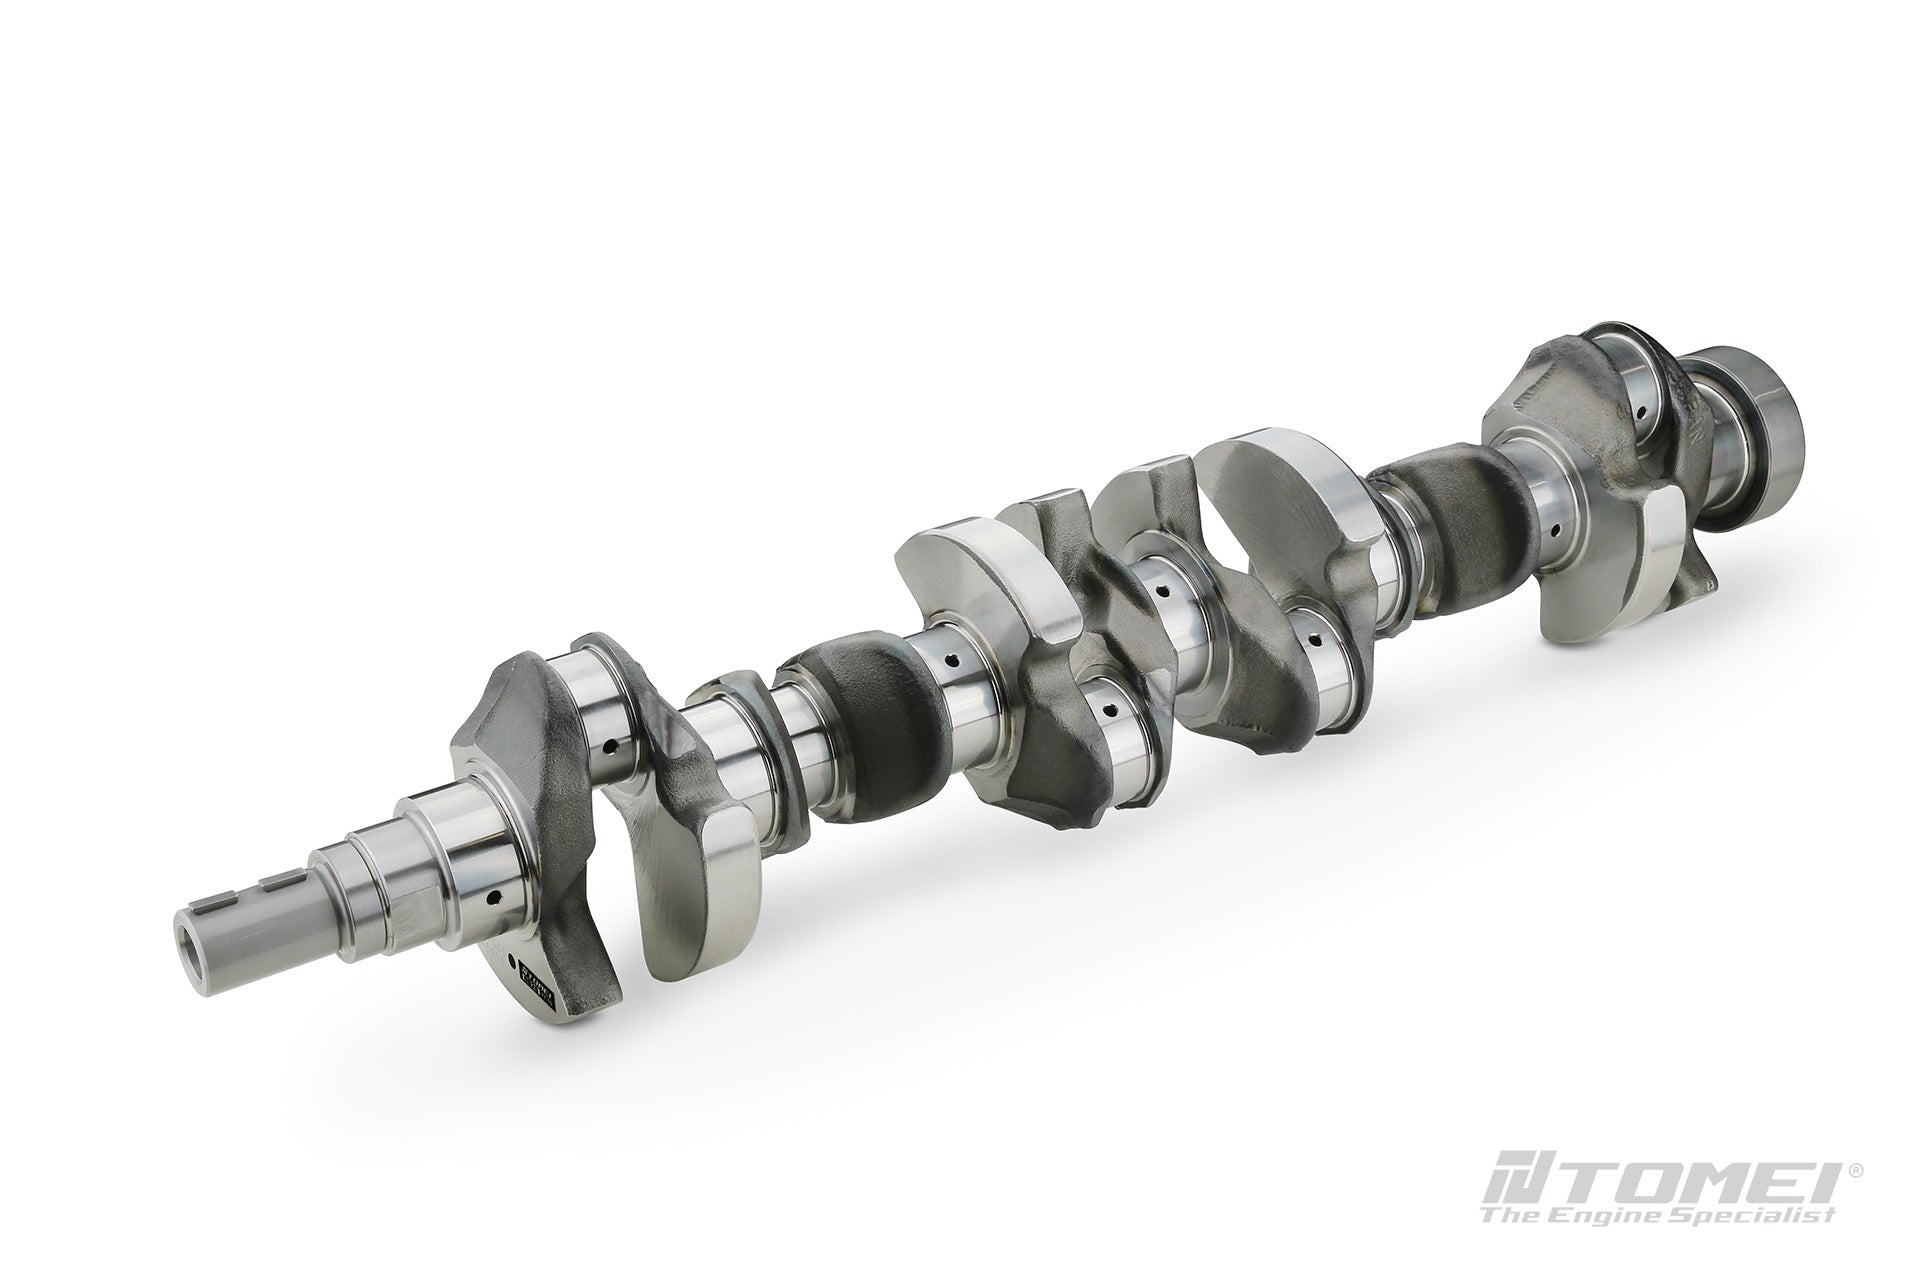 TOMEI FORGED 8 COUNTERWEIGHT CRANKSHAFT RB26DETT 2.8 77.7mm (Previous Part Numbe